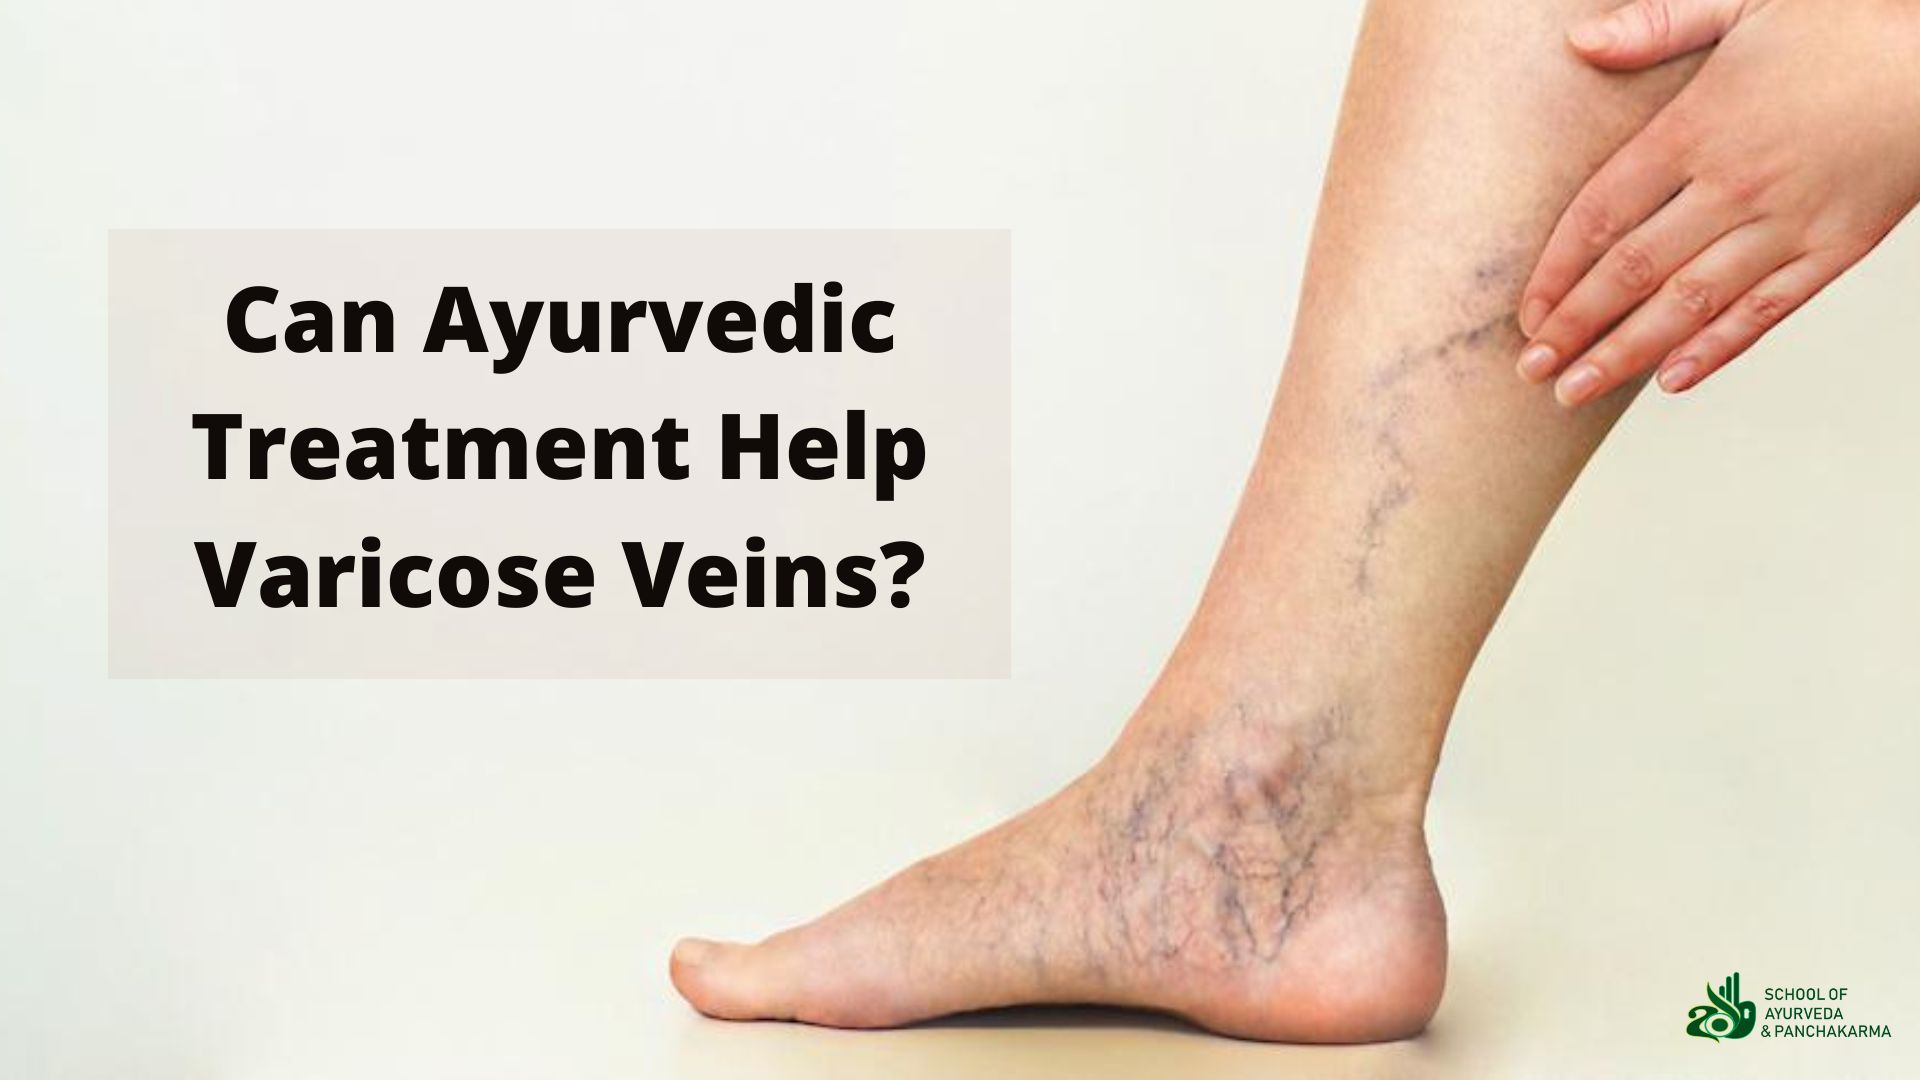 How to Treat Painful Varicose Veins at Home with Compression Stockings